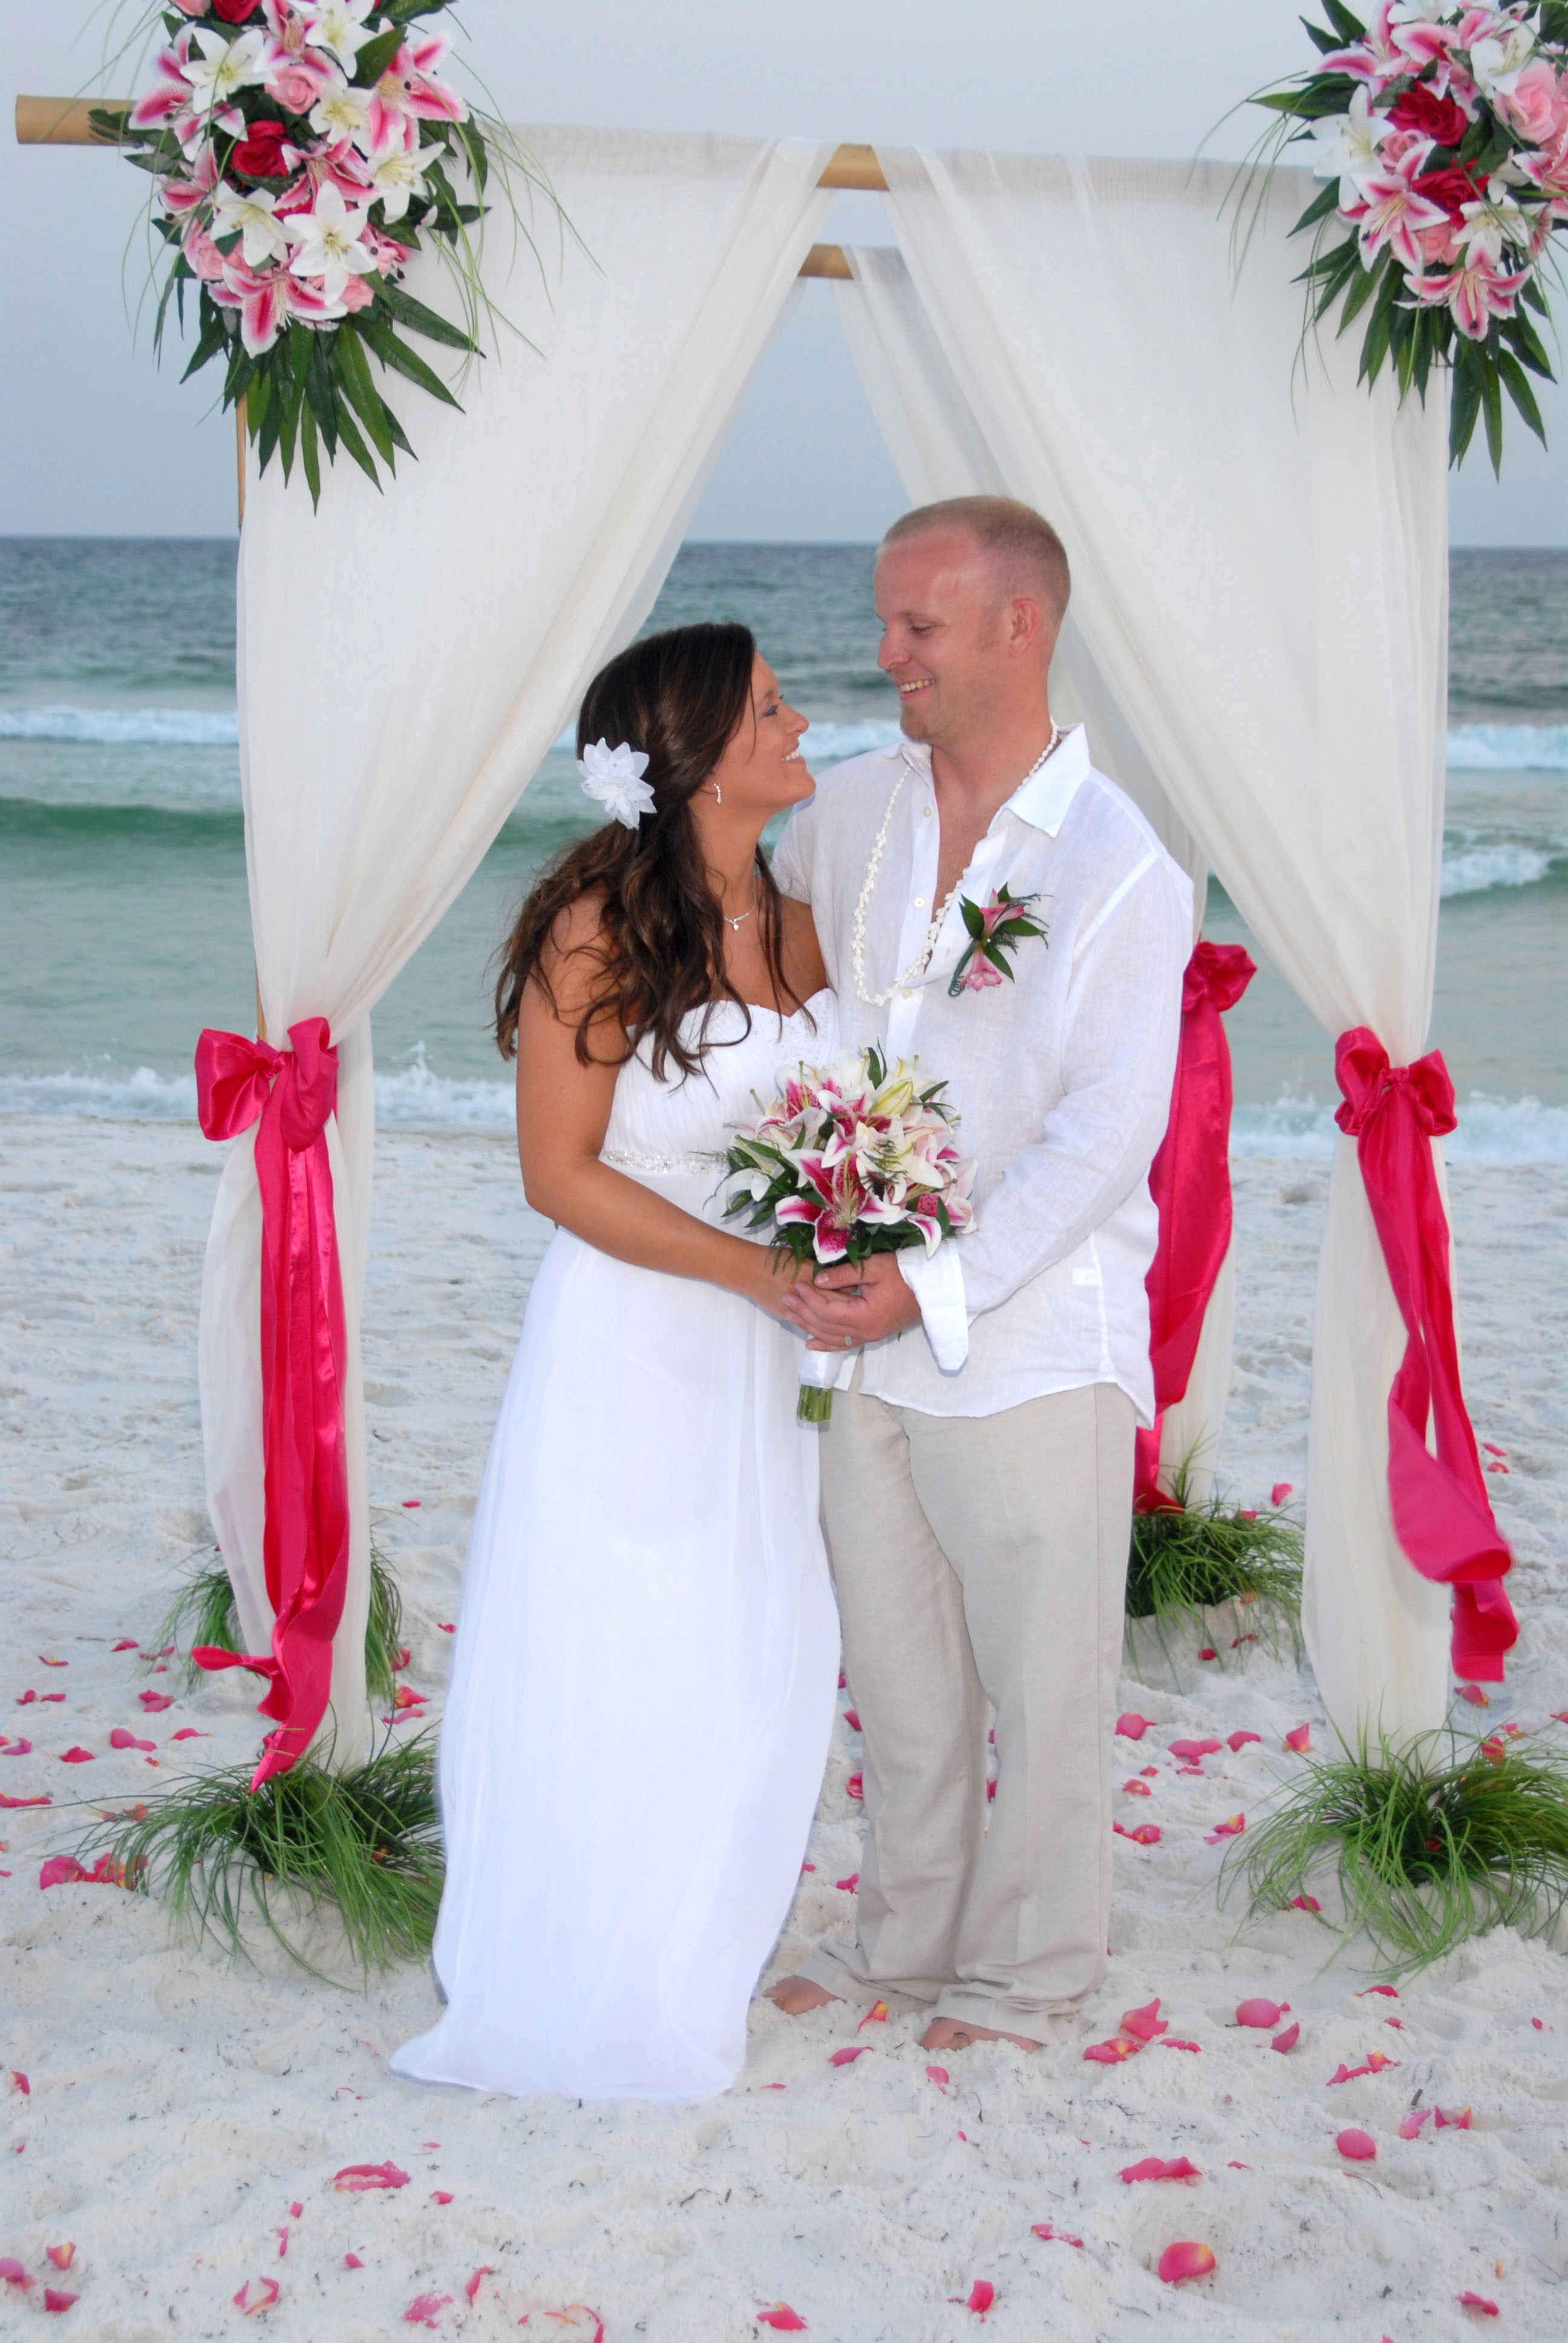 Download this Barefoot Weddings Beach Florida picture